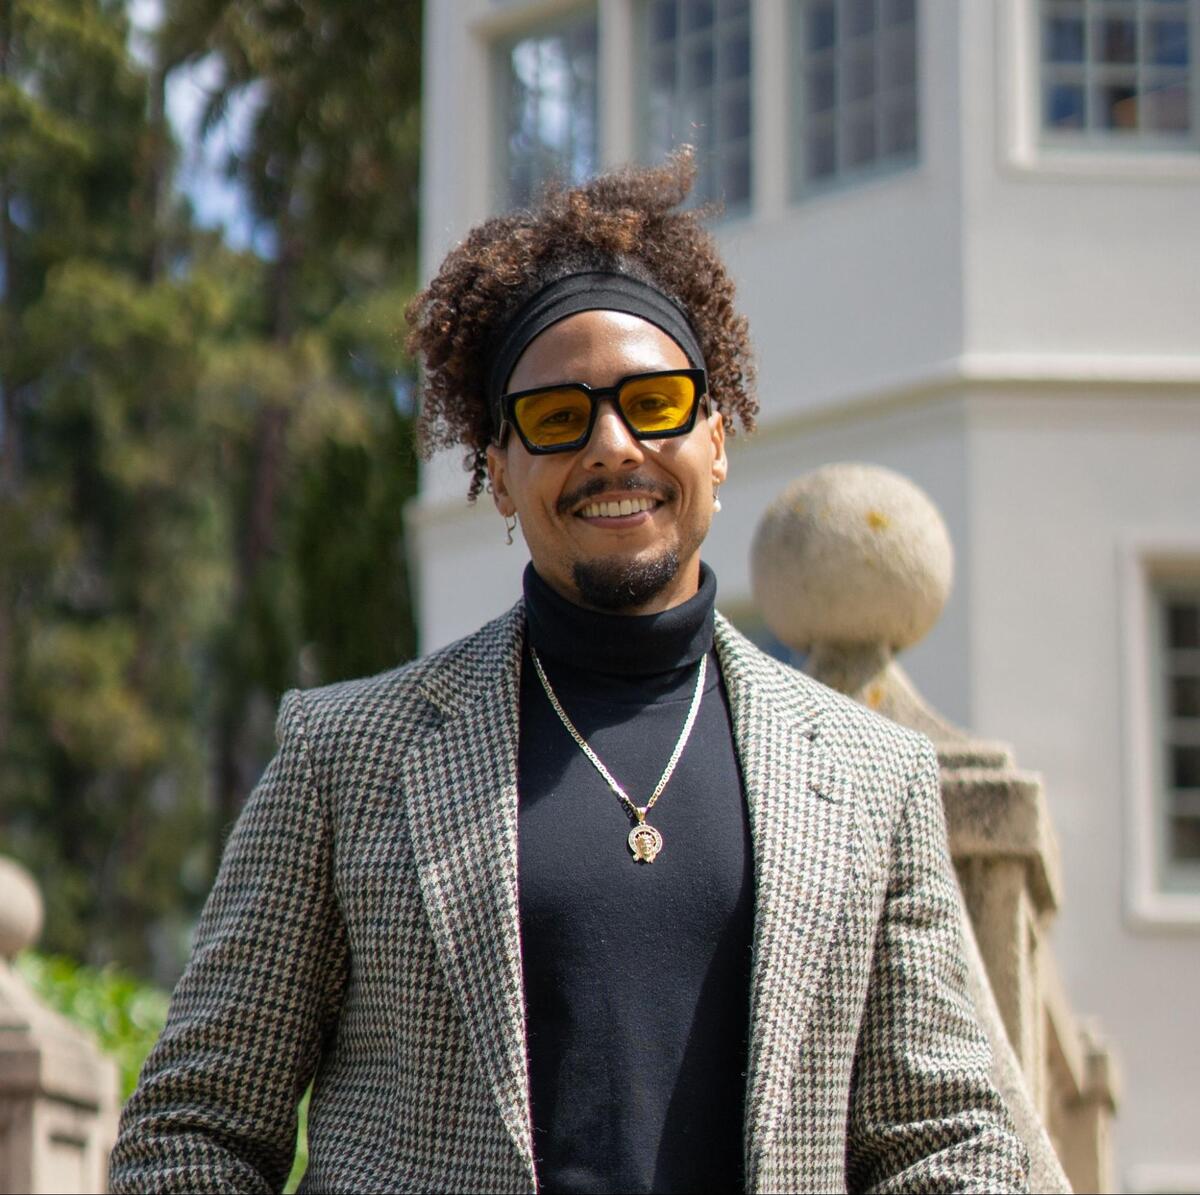 A picture of Daniel Lobo wearing yellow sunglasses, a black turtleneck shirt, and a gingham blazer.